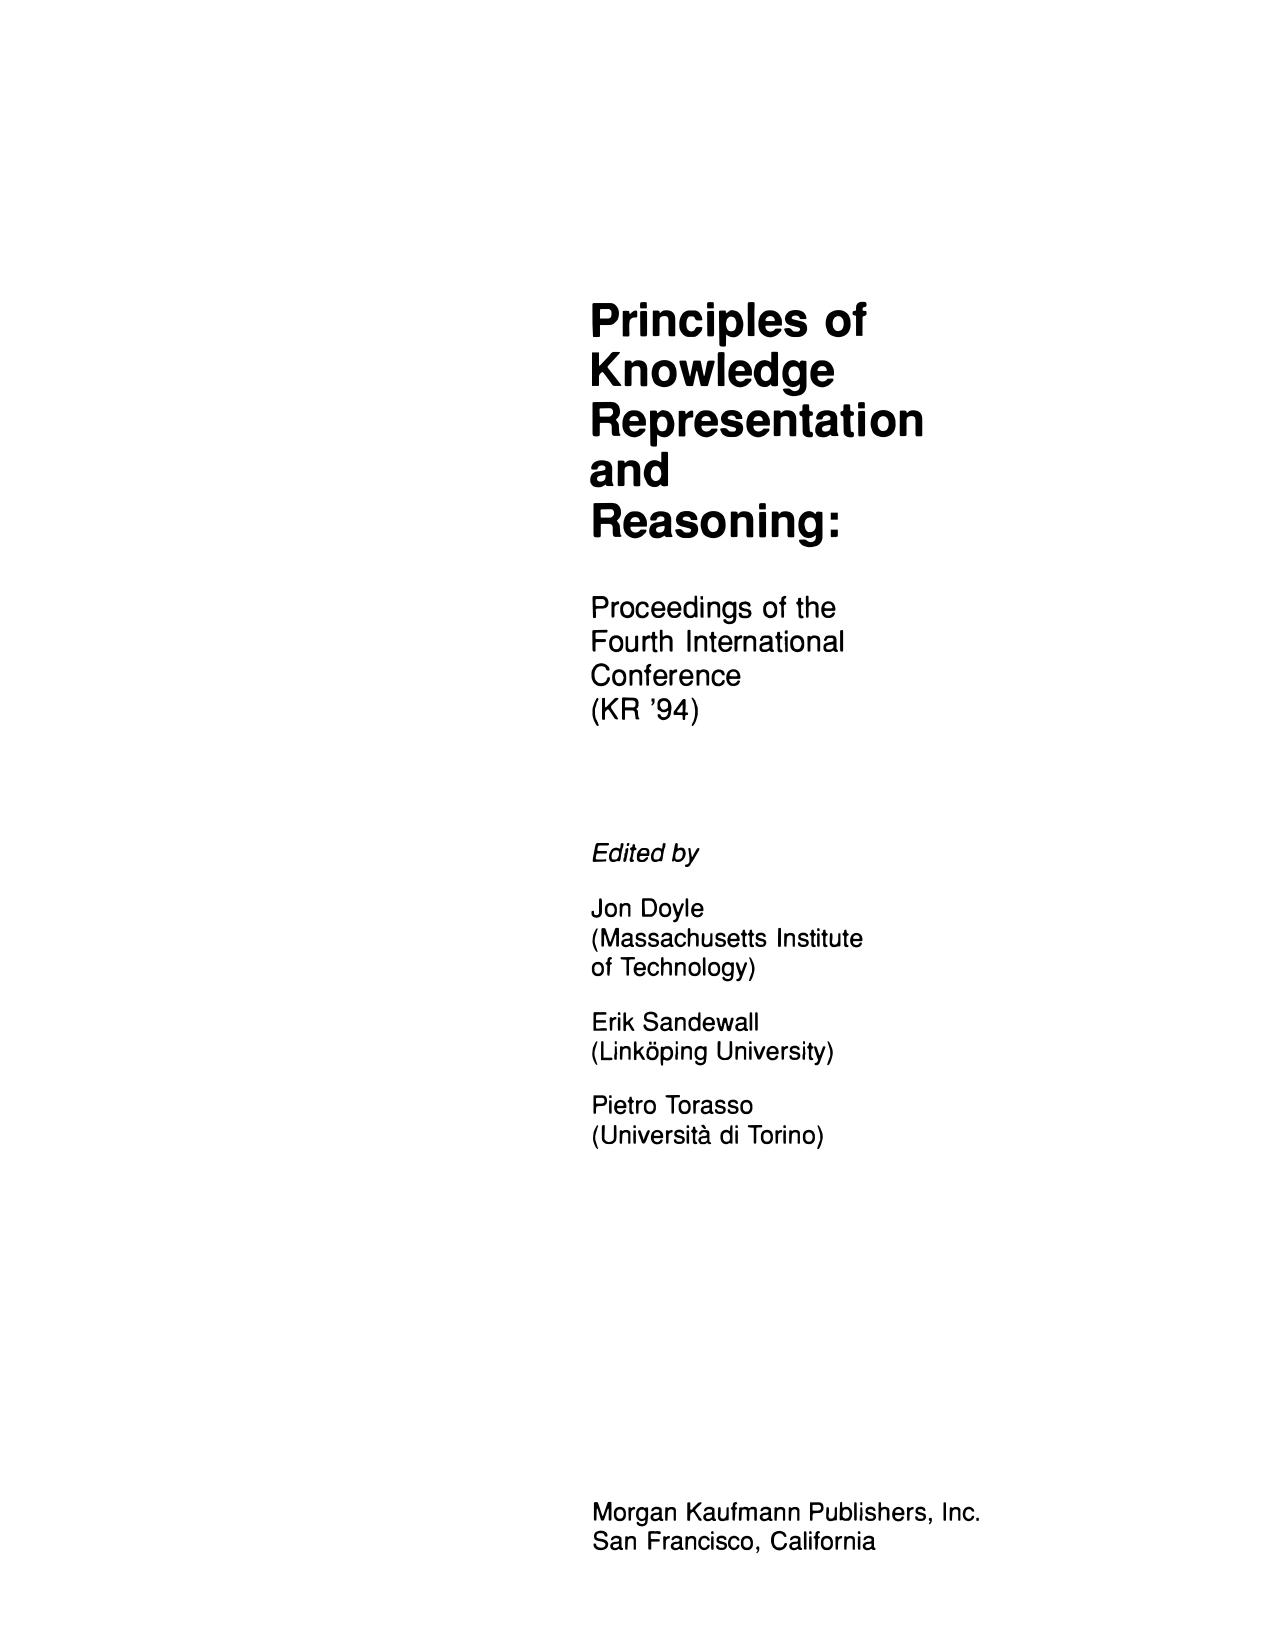 Principles of Knowledge Representation and Reasoning: Proceedings of the Fourth International Conference (KR'94)